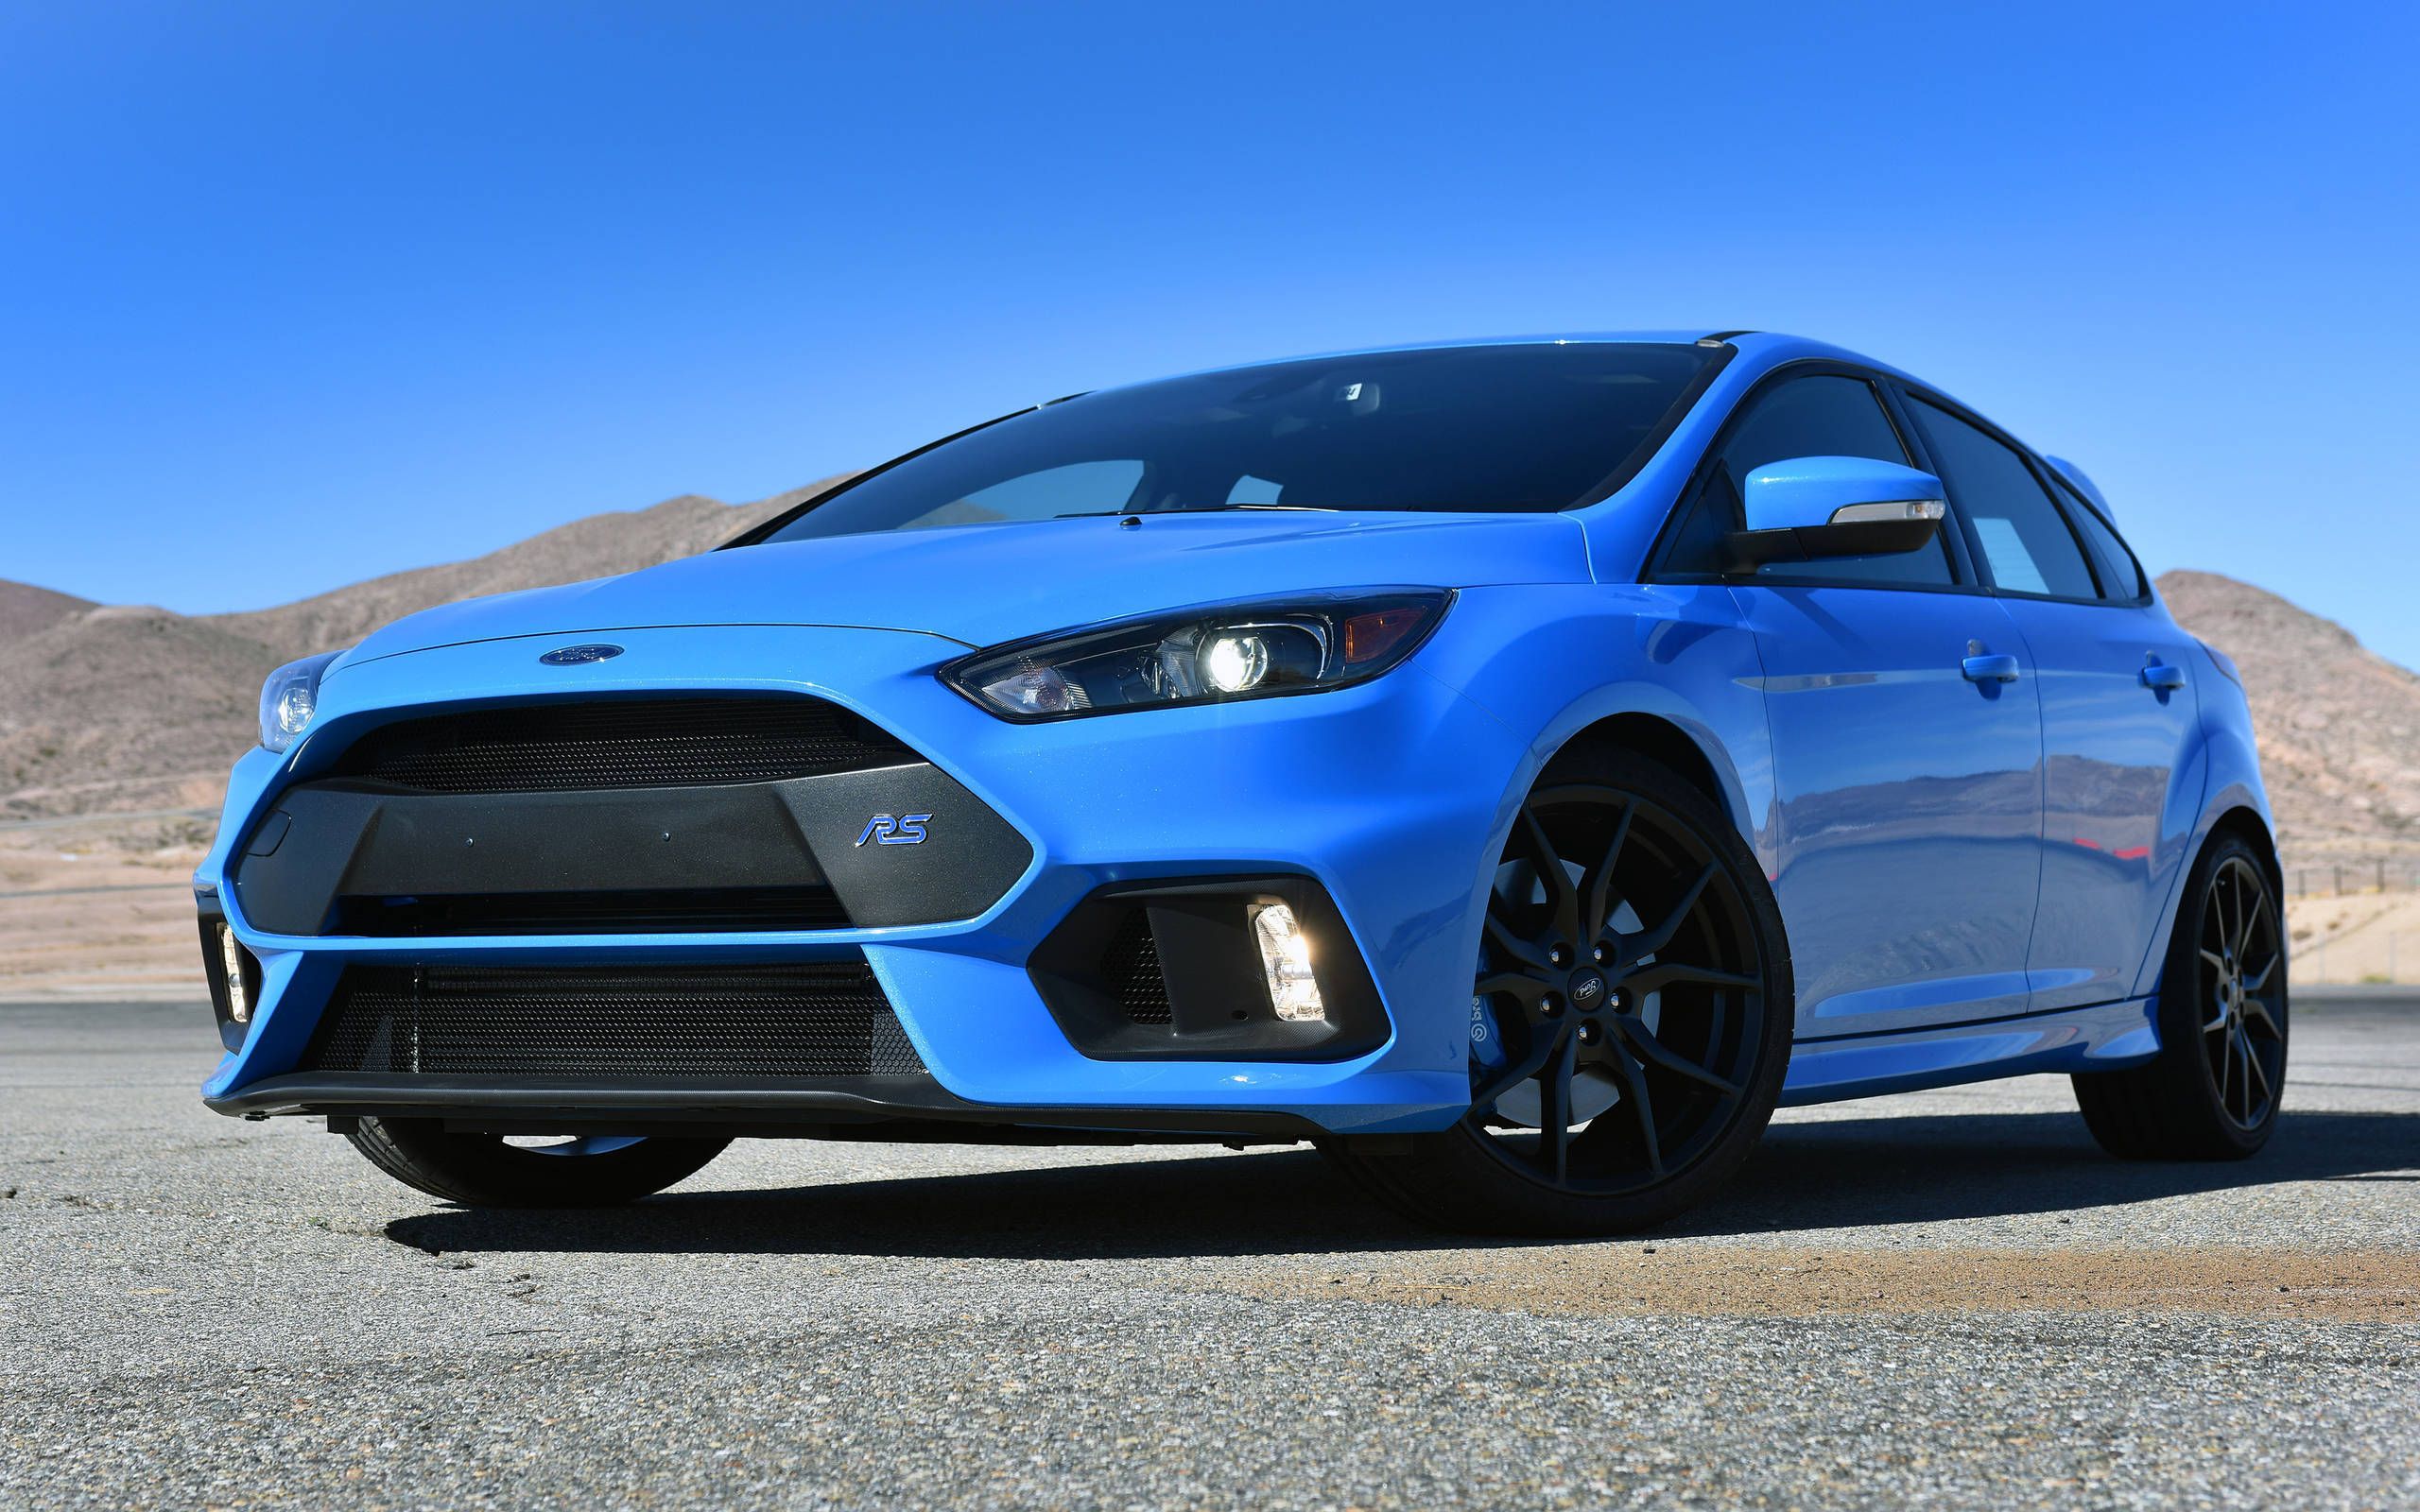 2016 Ford Focus RS 5-door review: Ford's best car ever?